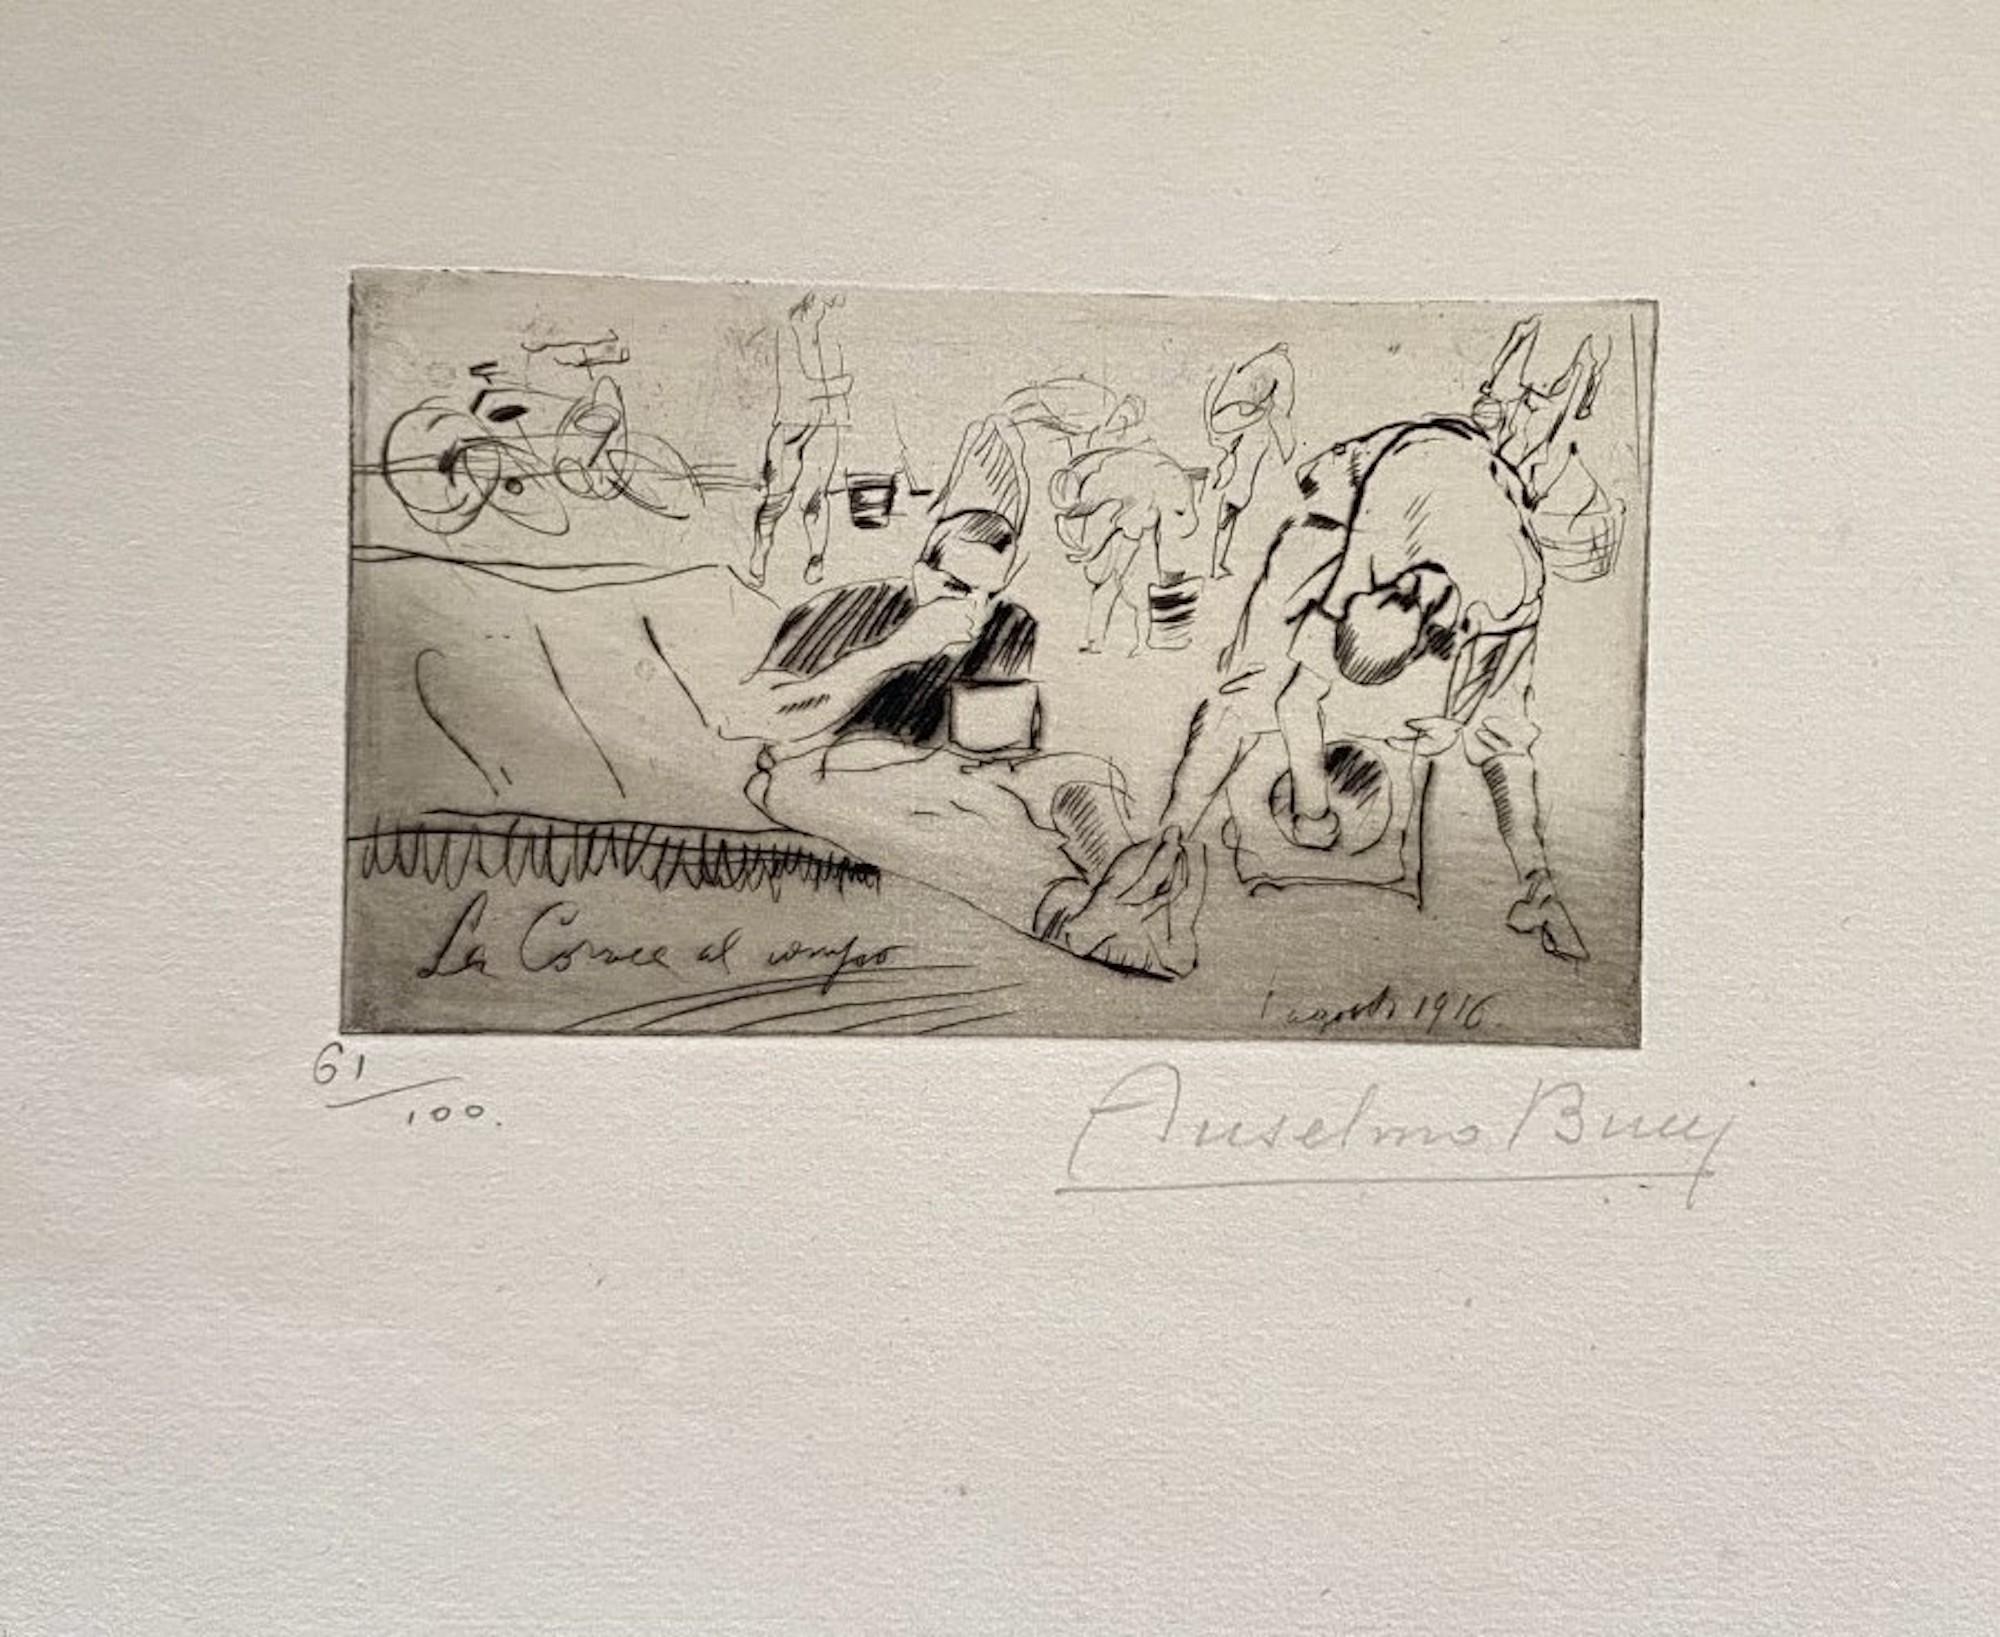 "Military" 1917s is a beautiful print in etching technique, realized by Anselmo Bucci (1887-1955).

Hand signed. Numbered 61/100 of prints on the lower left. On the lower left corner, an illegible iscription written in pencil.

Image Dimensions: 8.5